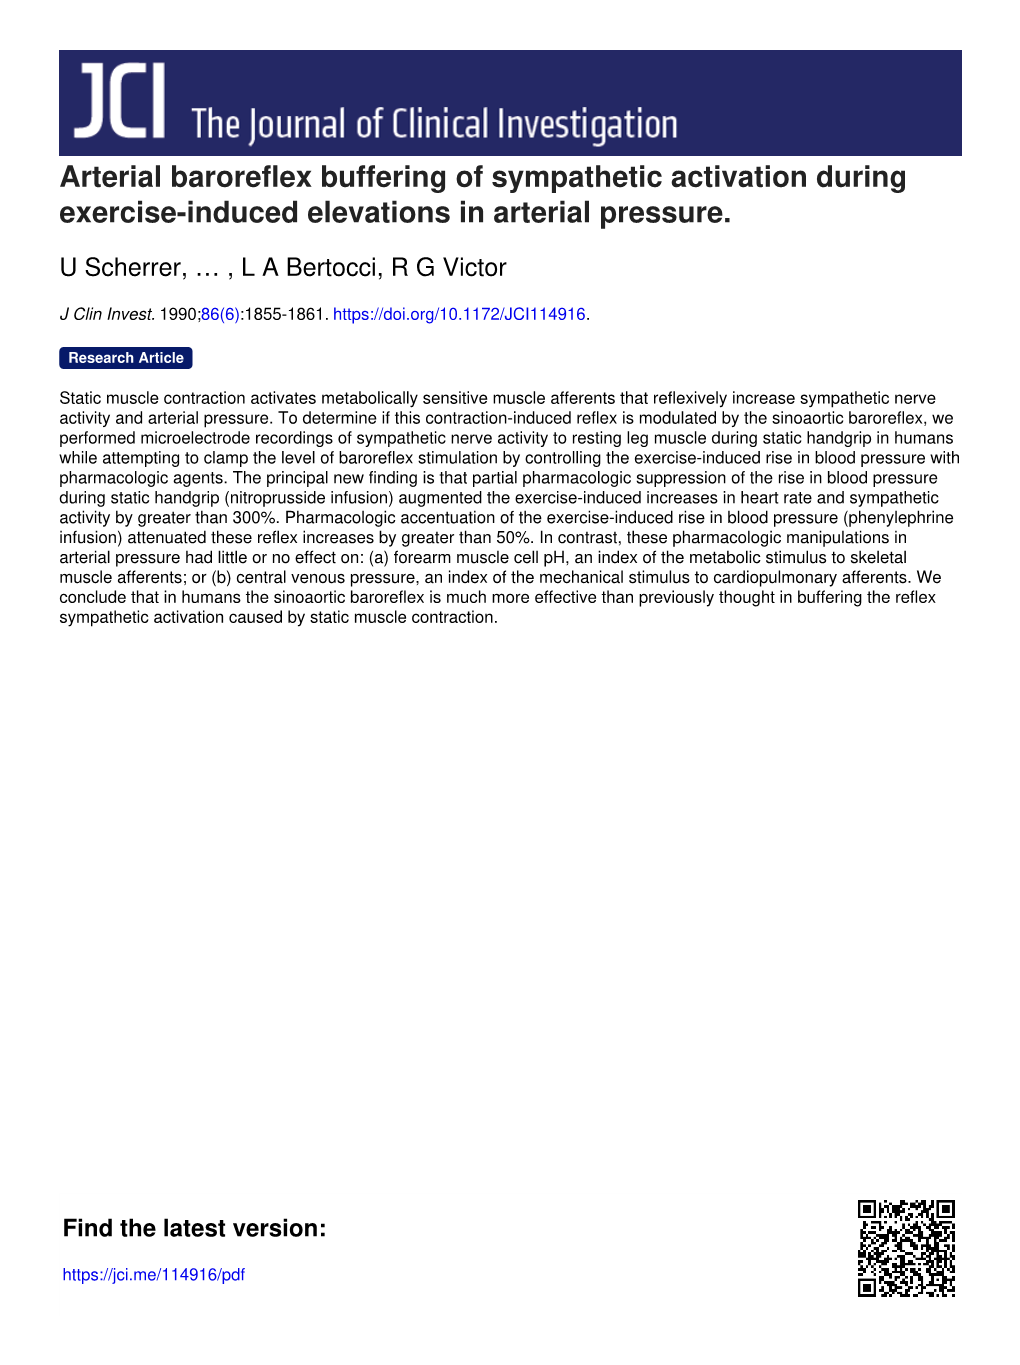 Arterial Baroreflex Buffering of Sympathetic Activation During Exercise-Induced Elevations in Arterial Pressure